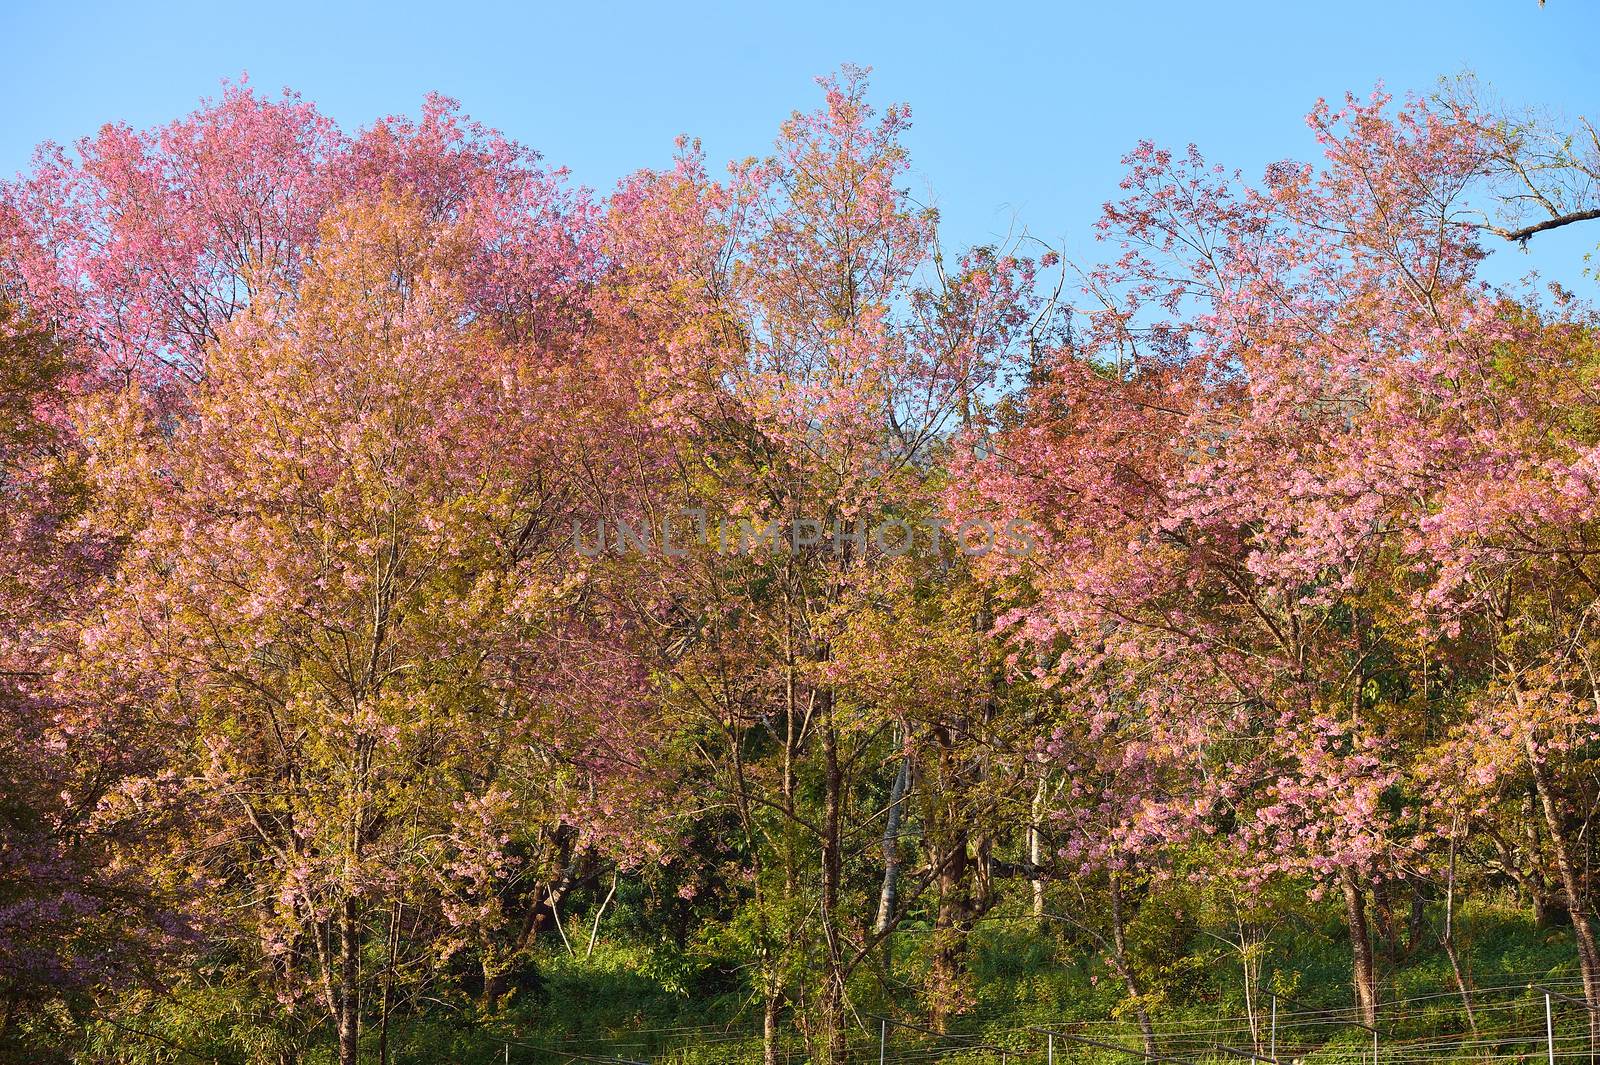 Wild Himalayan Cherry (Prunus cerasoides) in Khun Wang, Doi Inth by think4photop